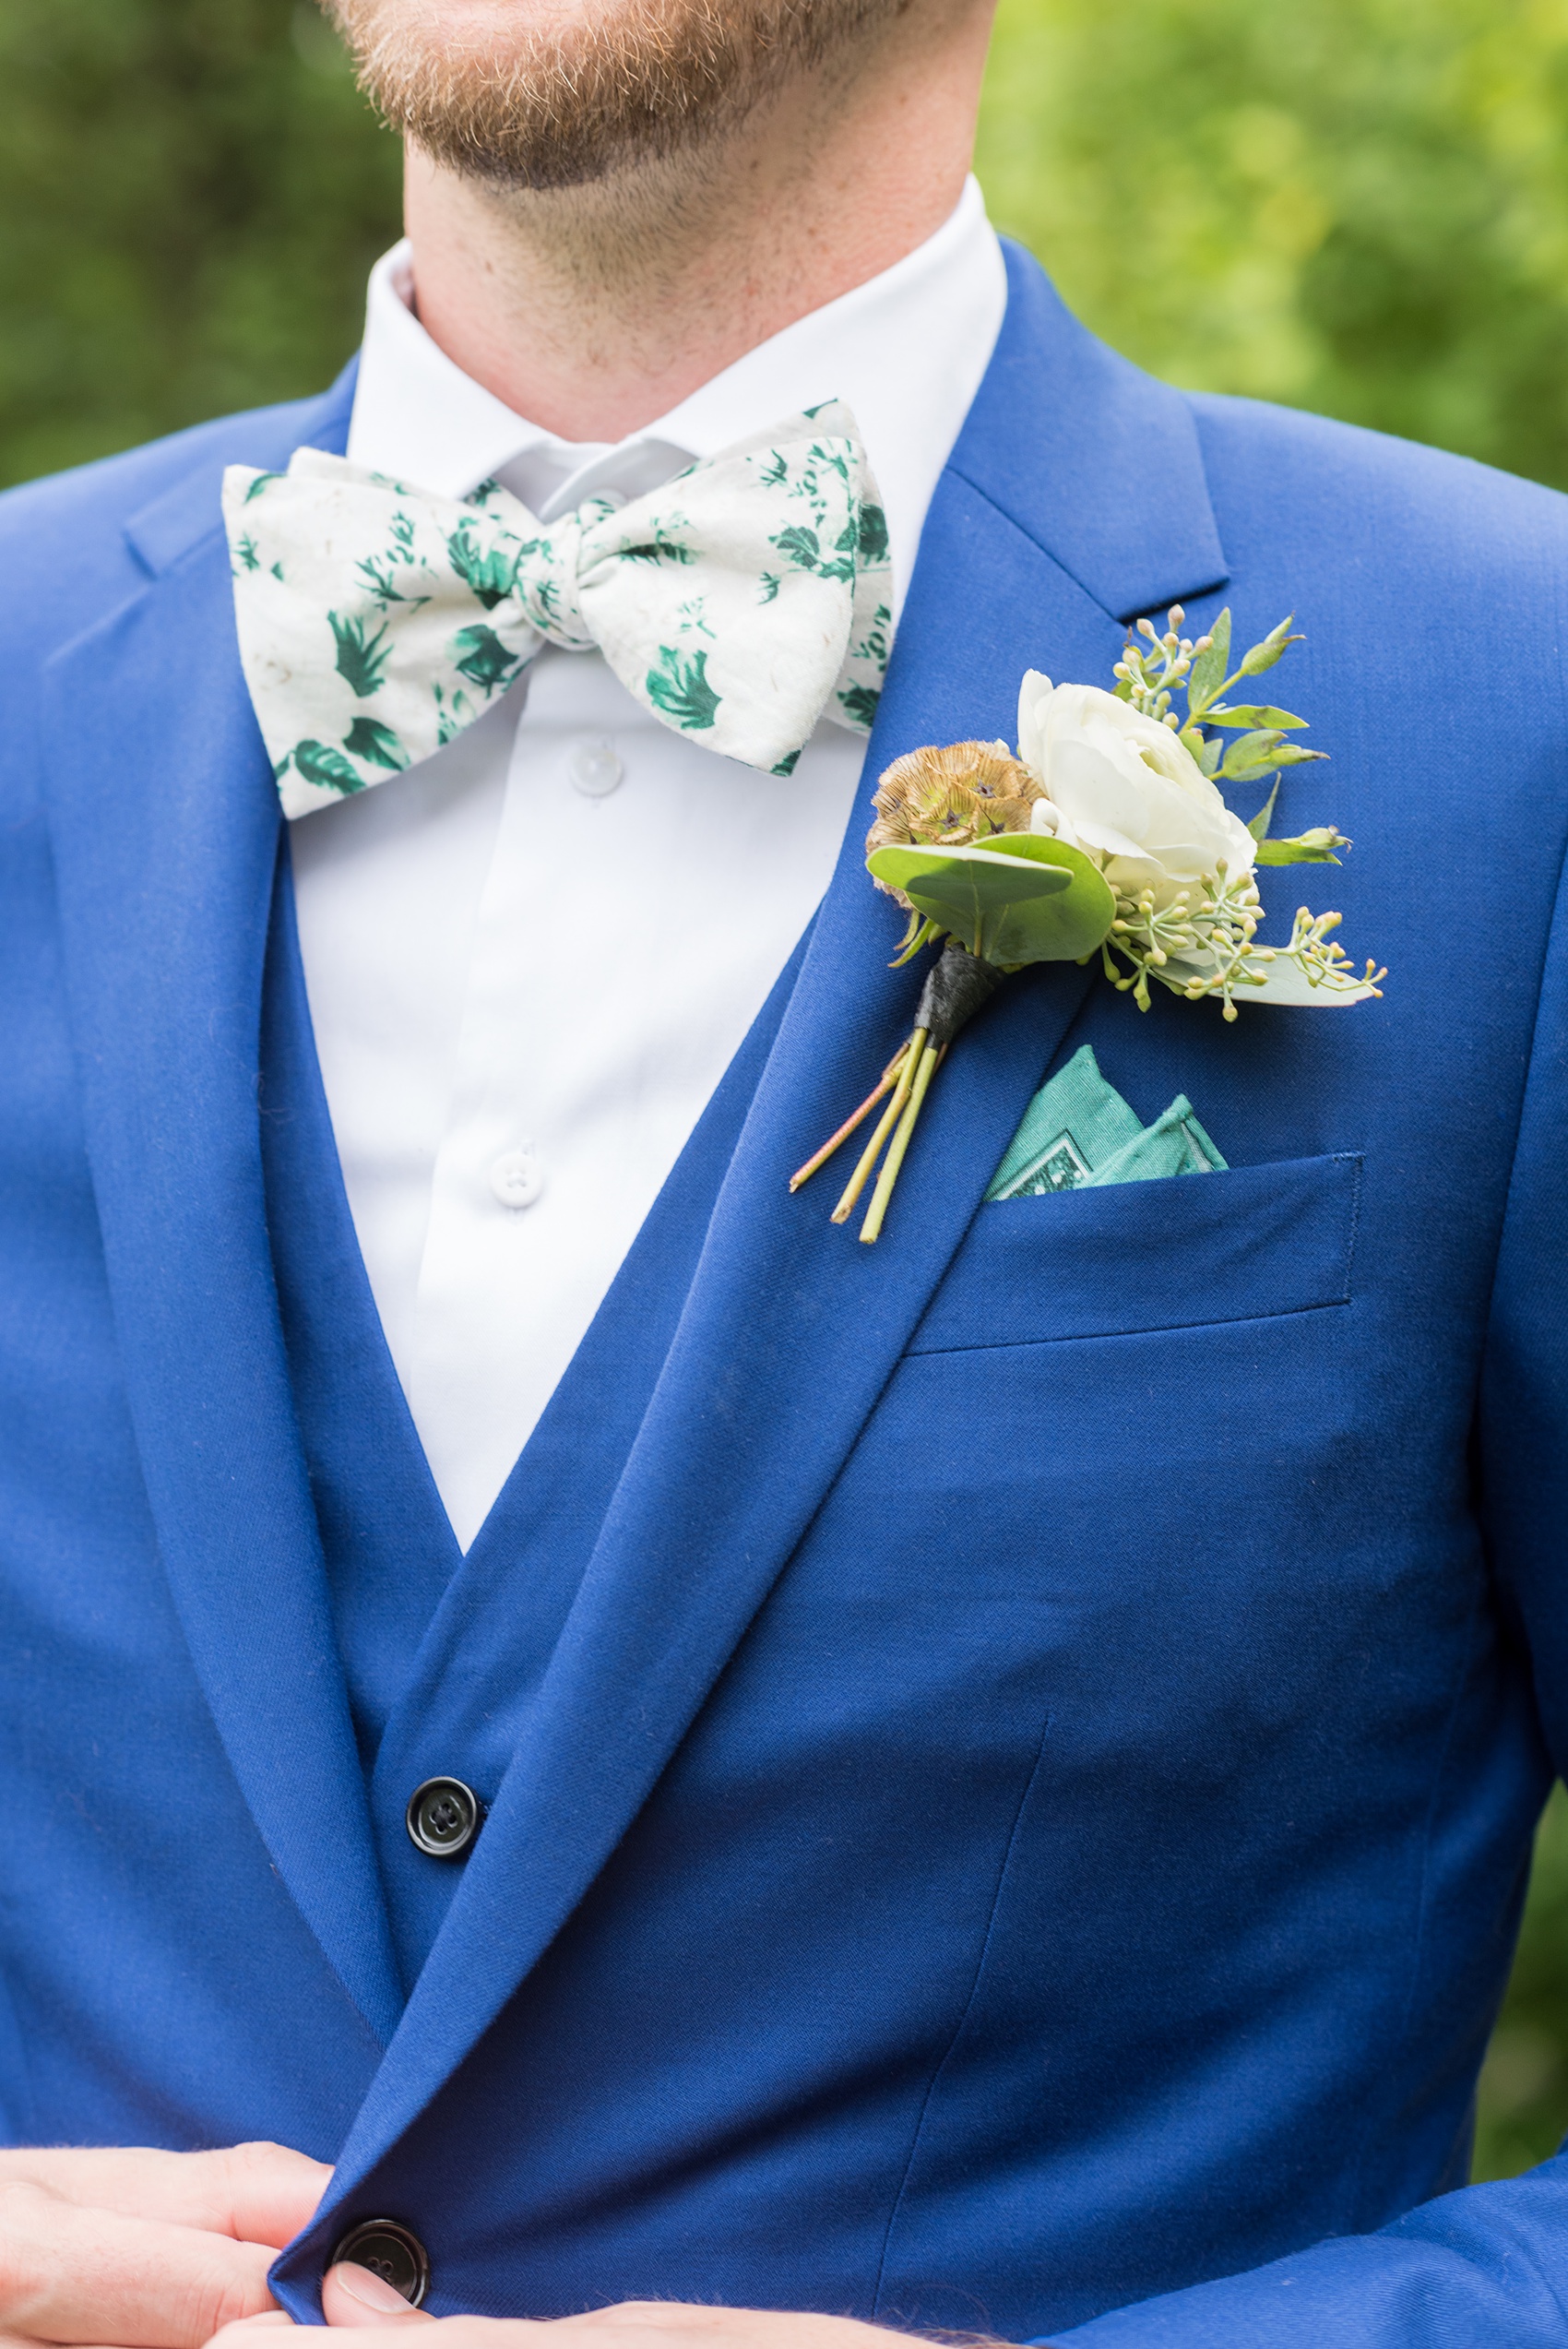 Wedding photos at Crabtree's Kittle House in Chappaqua, New York by Mikkel Paige Photography. This venue in Westchester county was the perfect place for a summer wedding. The groom's custom blue Indochino suit had the best detail: their names and wedding date embroidered in the lining. He wore a pattern bow tie with greenery print on it and a ranunculus boutonniere. Click through for more awesome details from the day! #bluesuit #patternbowtie #mikkelpaige #CrabtreesKittleHouse #WestchesterWeddingVenues #WestchesterWedding #summerwedding #boutonniere #bowties #creativebowtie #cutebowtie